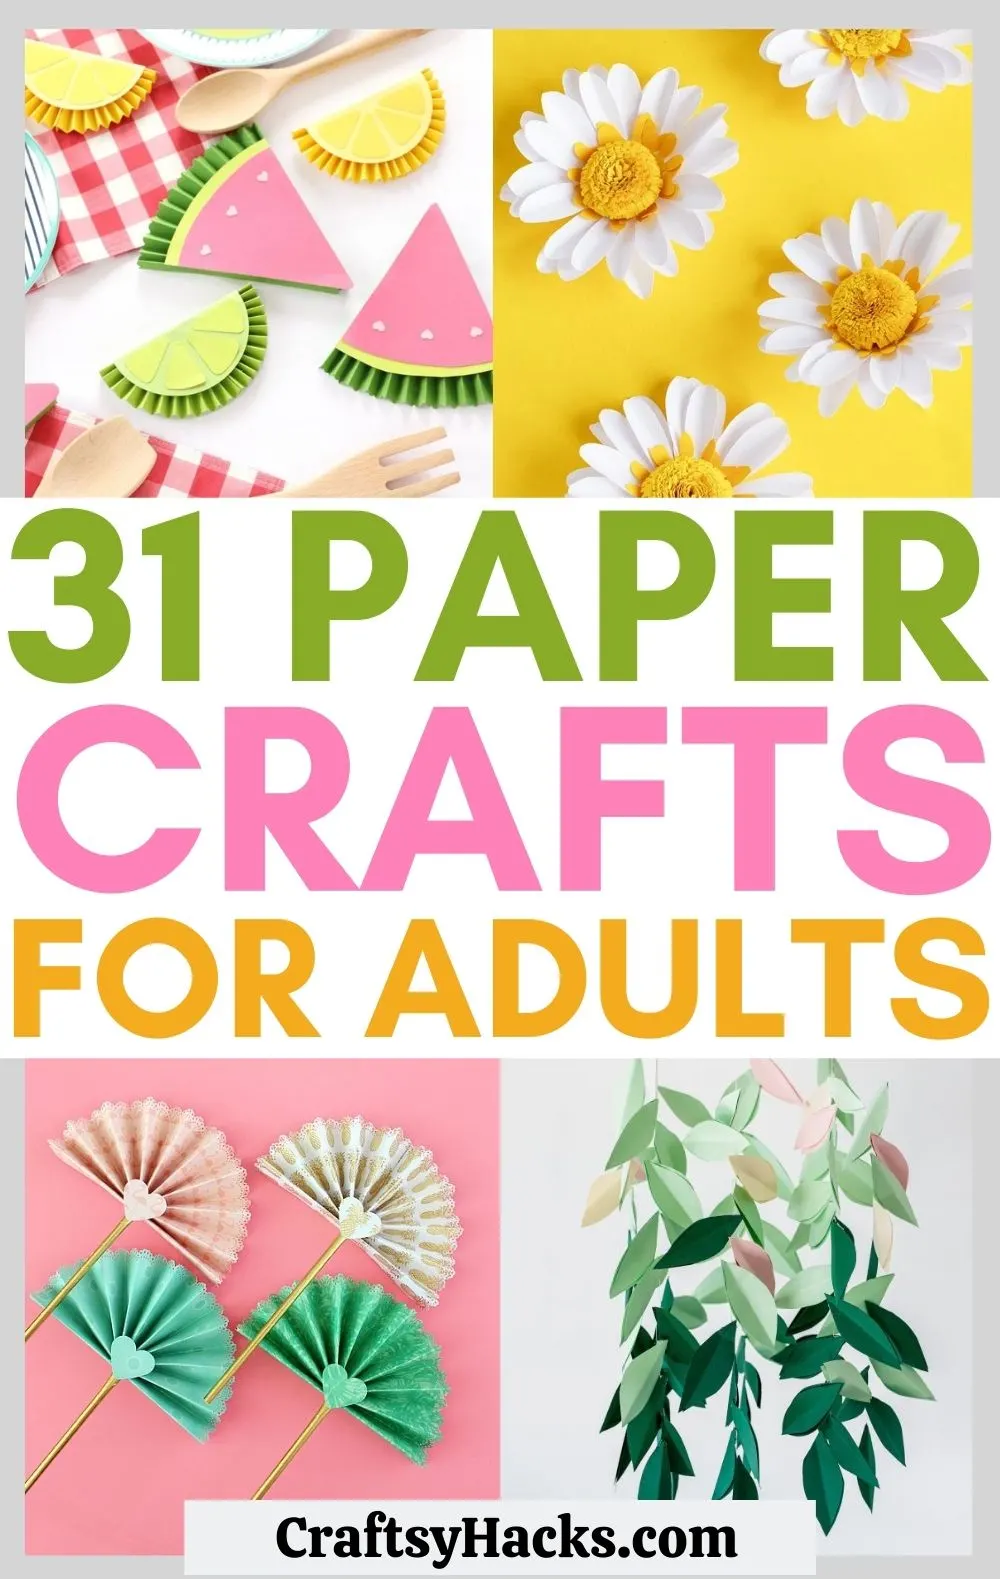 25 Easy Crafts For Adults  Arts and crafts for adults, Diy crafts for  adults, Craft projects for adults